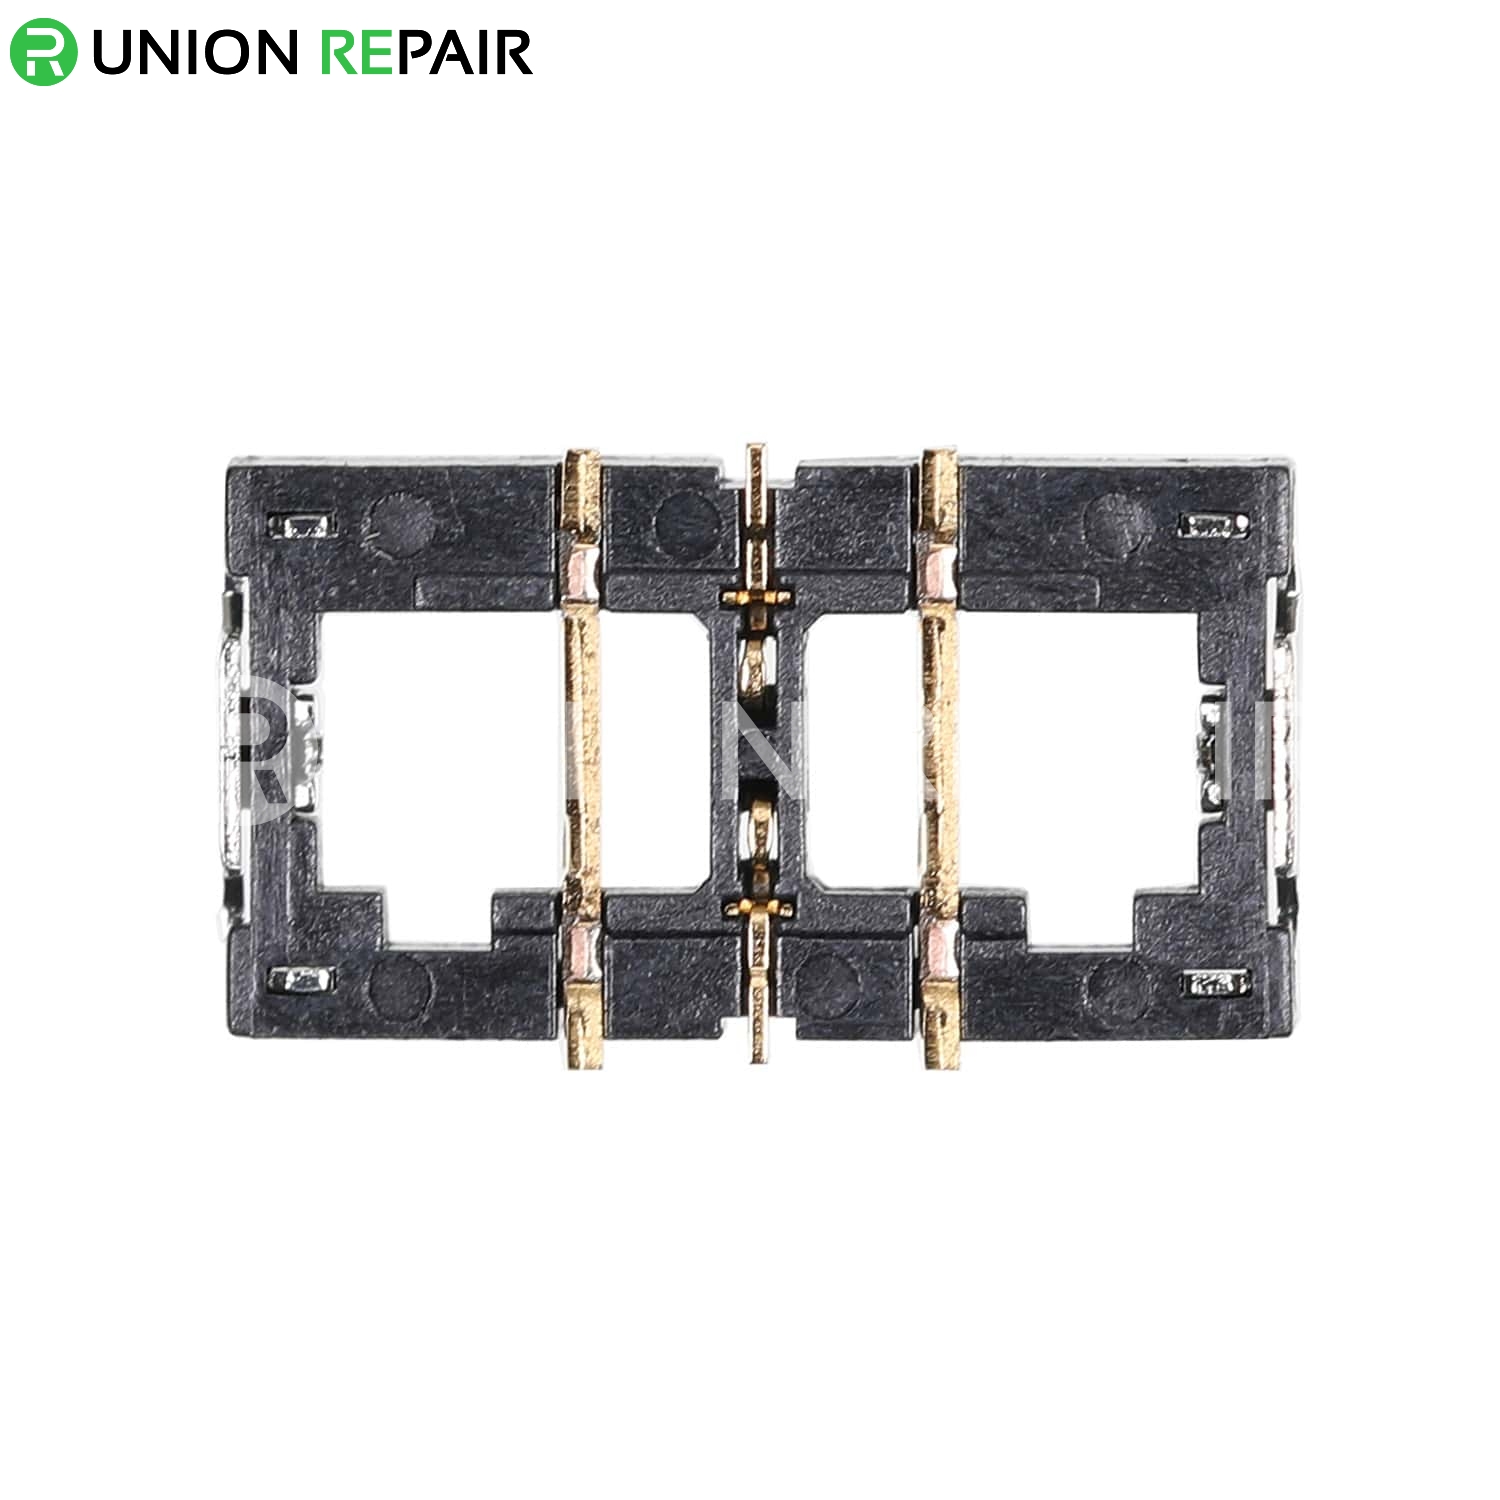 Replacement For Ipad Mini 1 2 Battery Connector Port Onboard